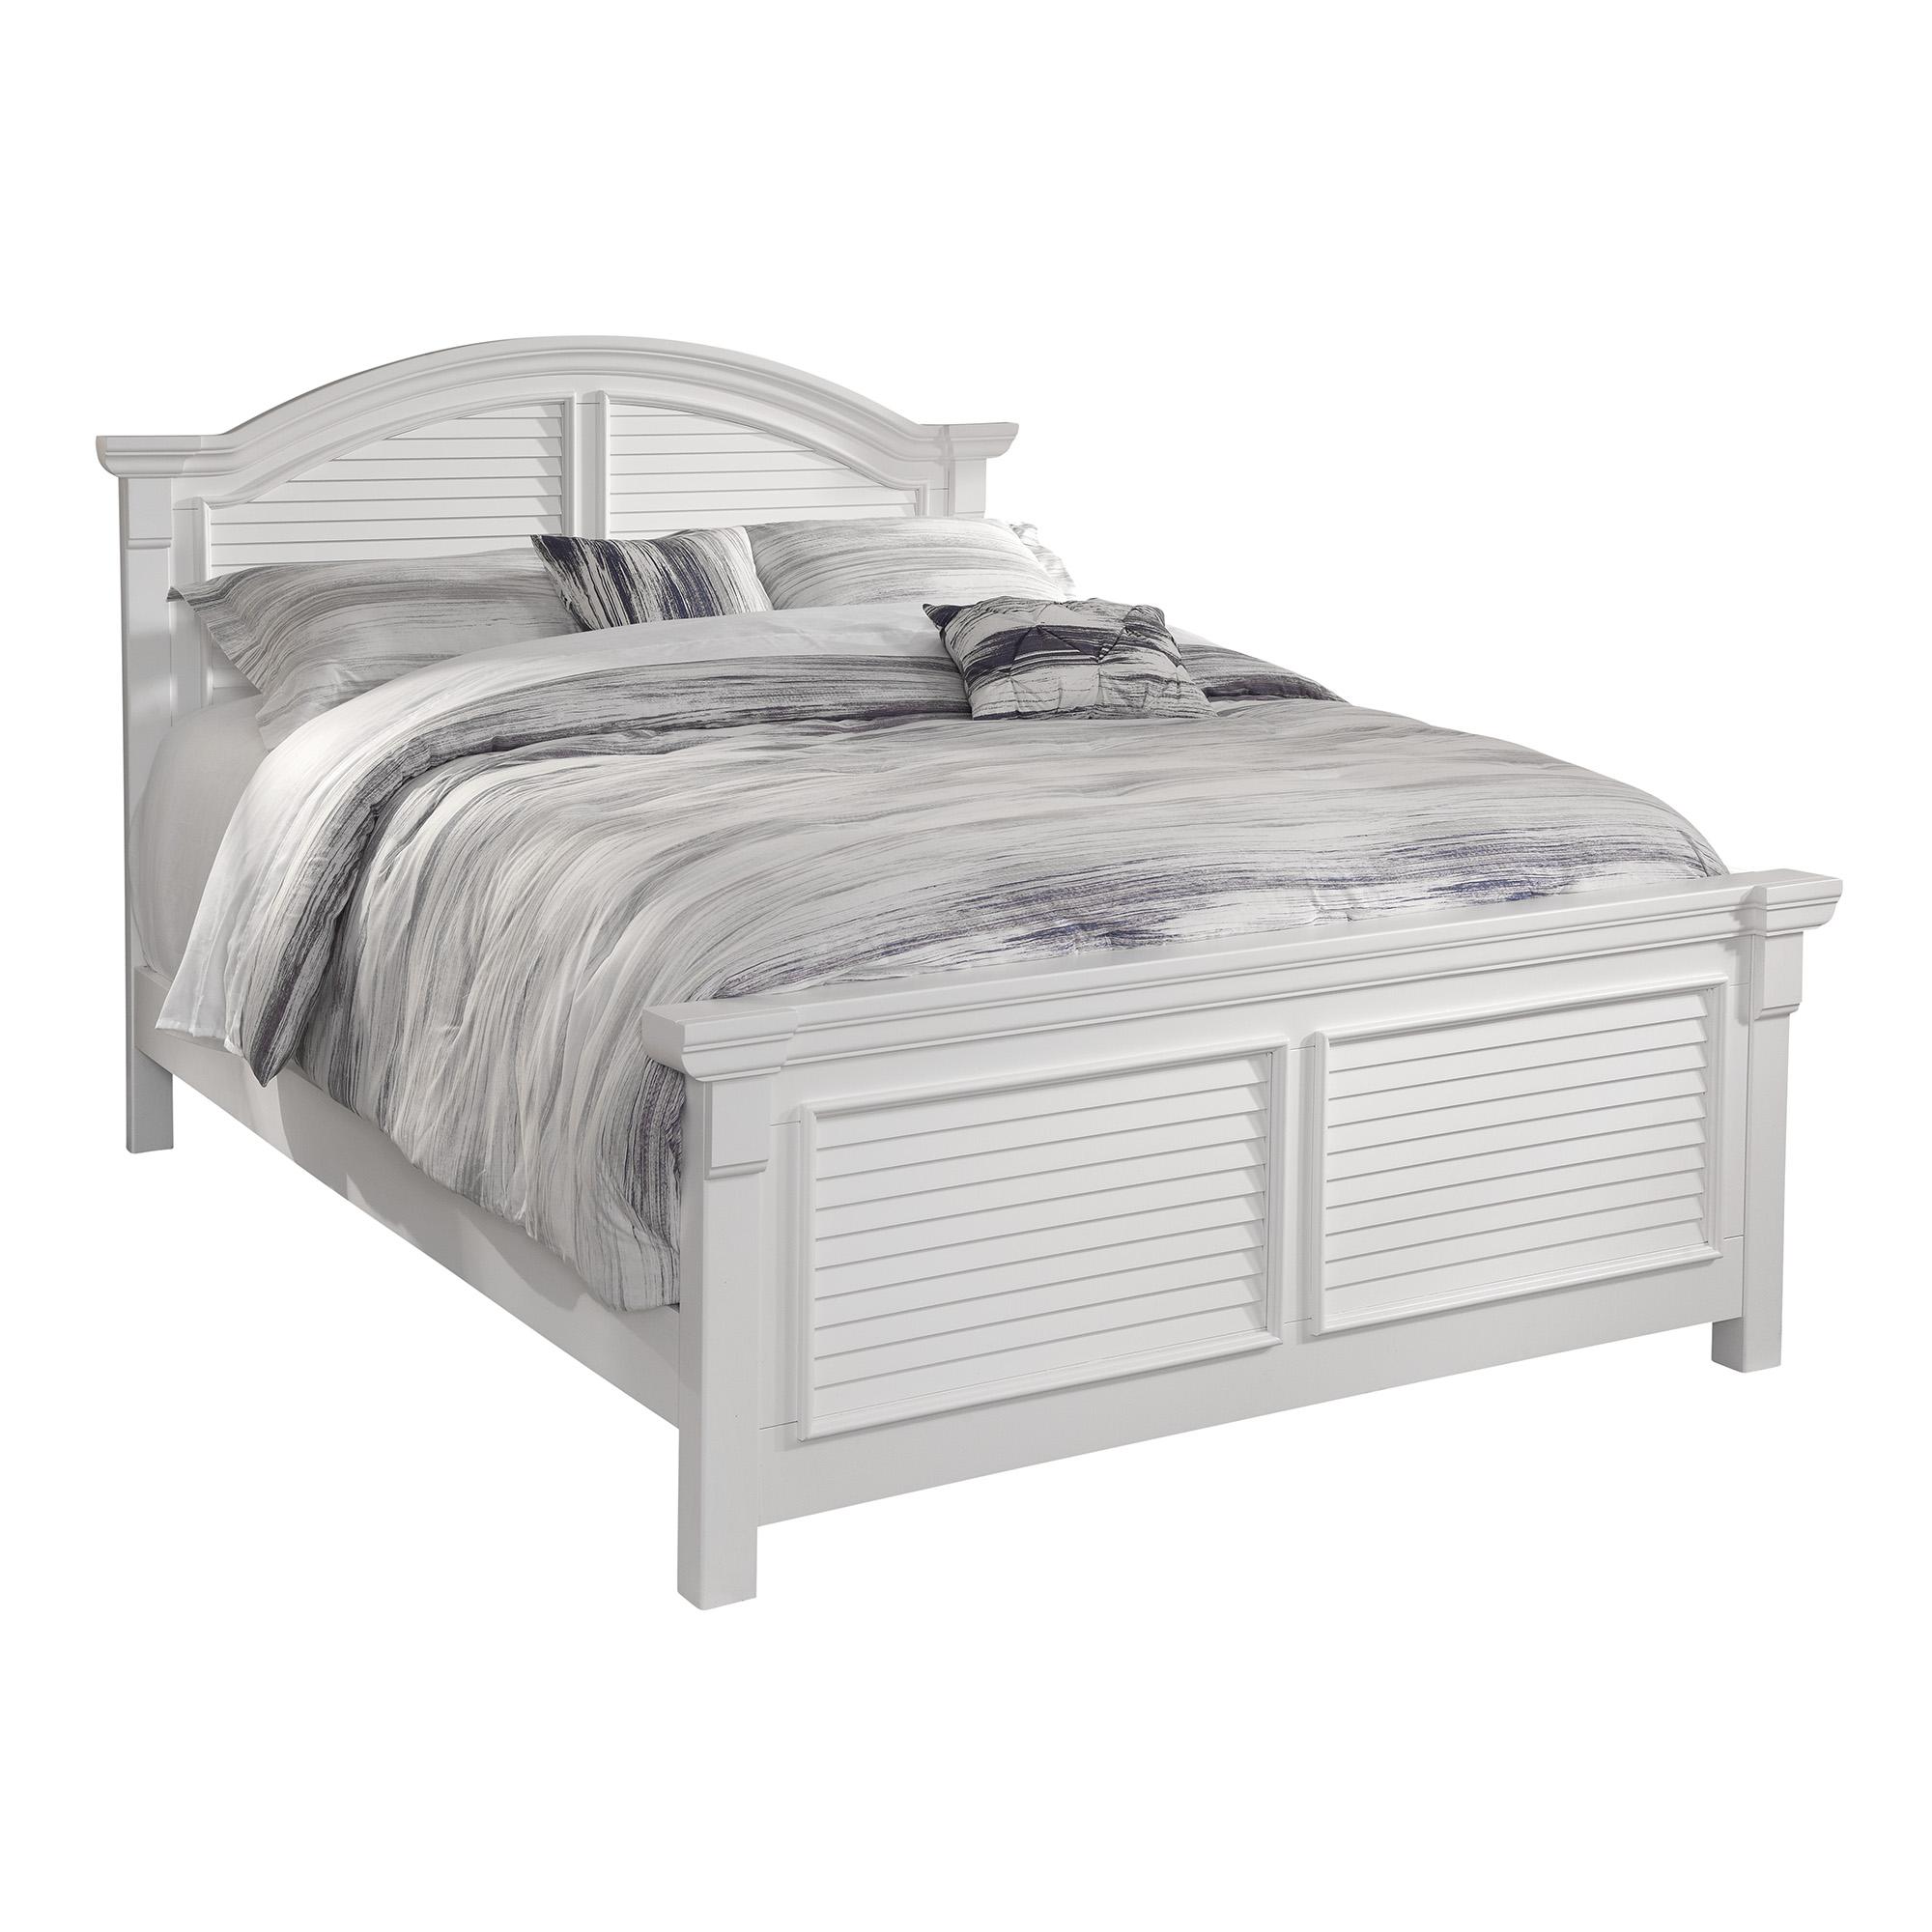 Classic, Traditional, Cottage Panel Bed COTTAGE 6510-50PAN 6510-50ARPN in White 